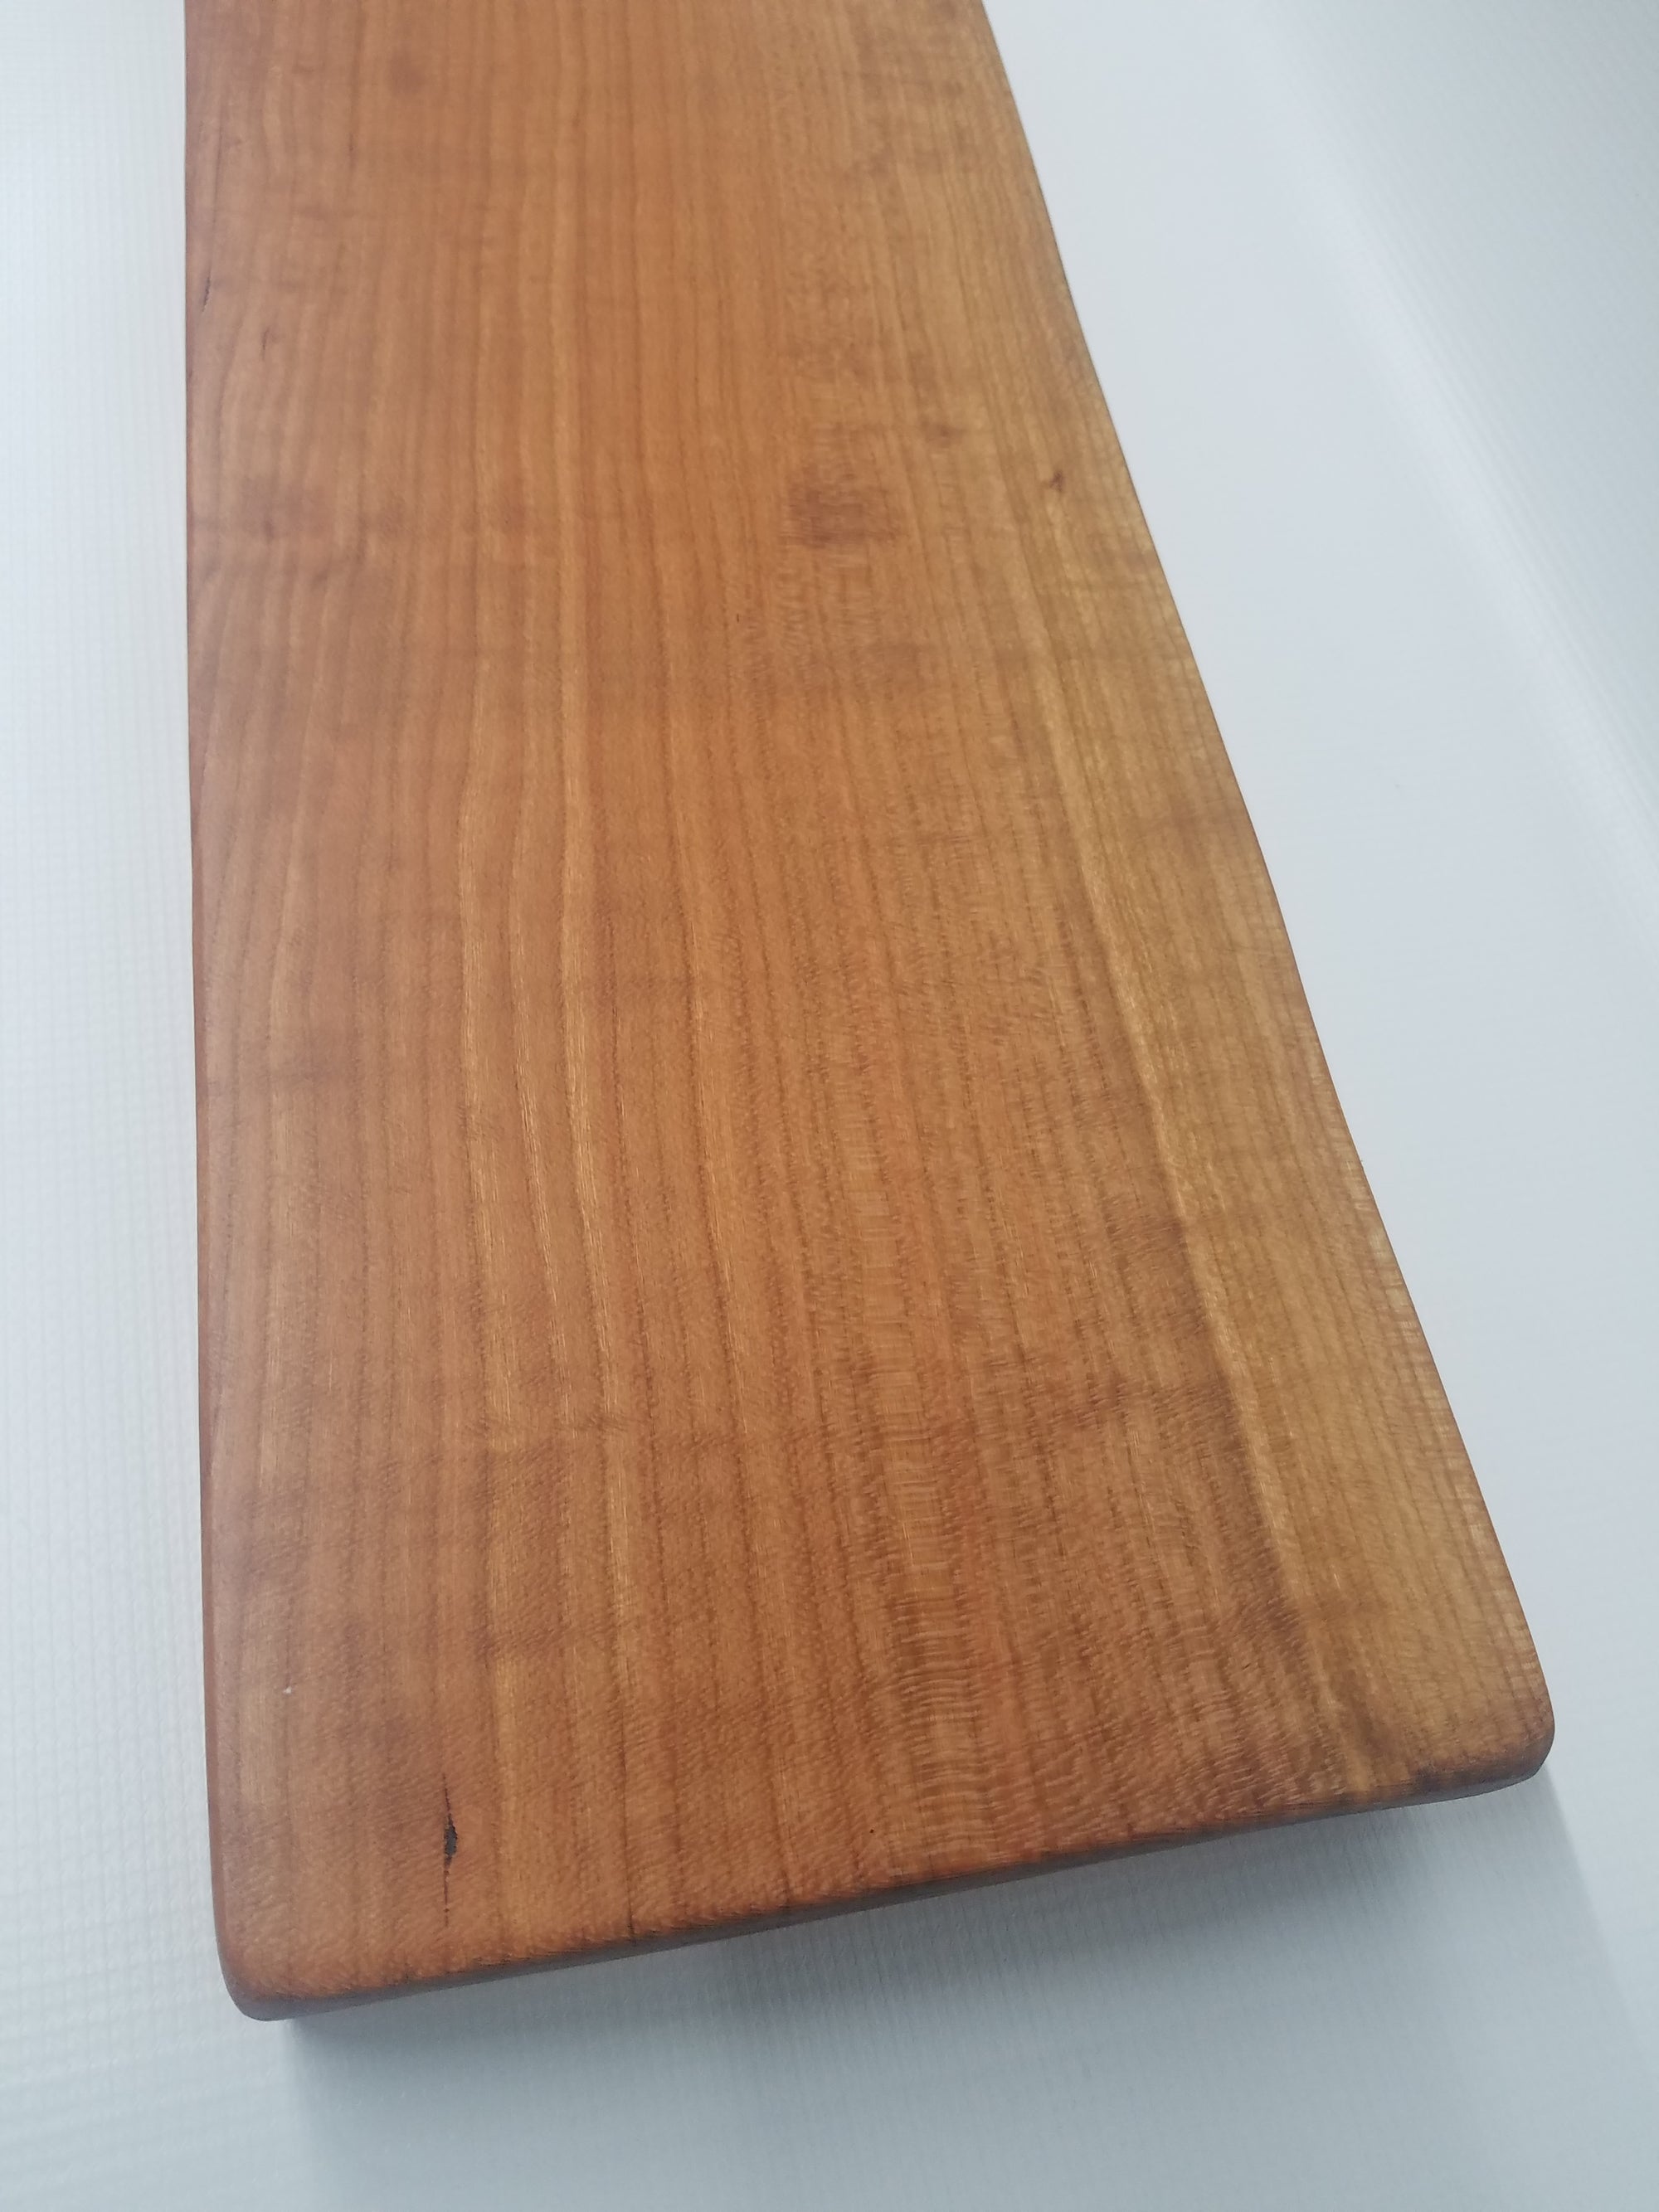 Large Charcuterie Board- Centerpiece- Serving Board- Live Edge Wood- Organic- Party- Wedding- Platter- Natural- Family- Friends- Table Decor